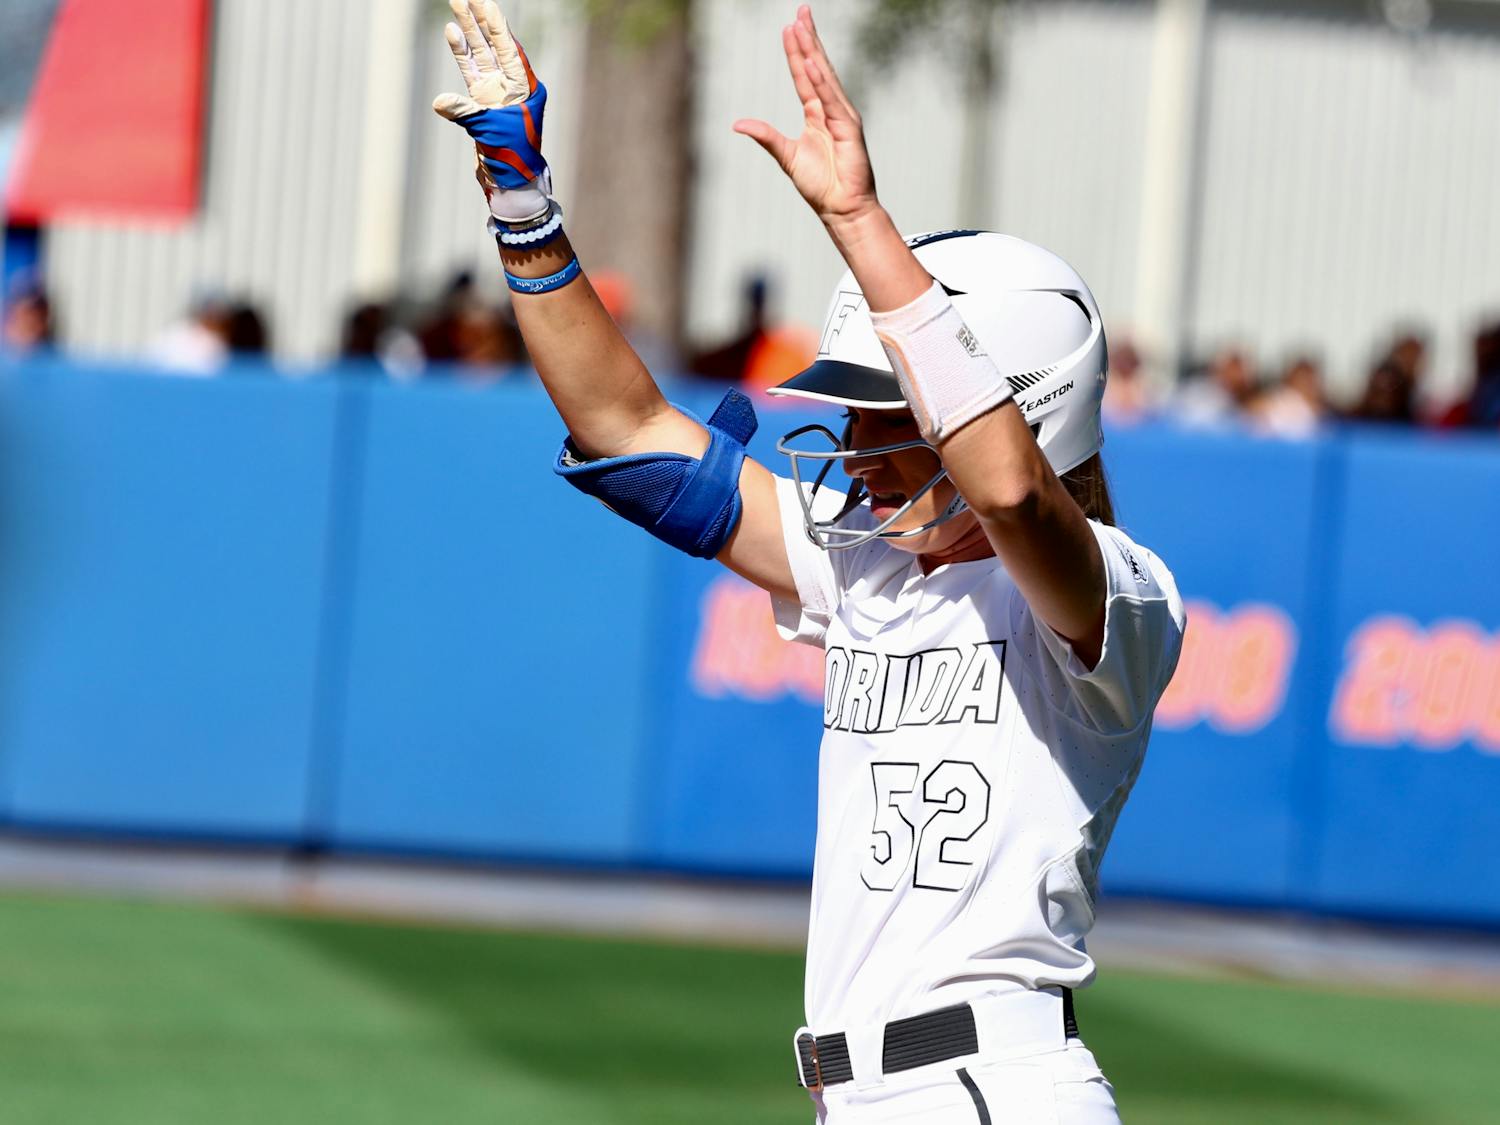 Justine McLean celebrates after reaching base during Florida's 5-0 win over Georgia on April 8, 2017, at Katie Seashole Pressly Stadium.